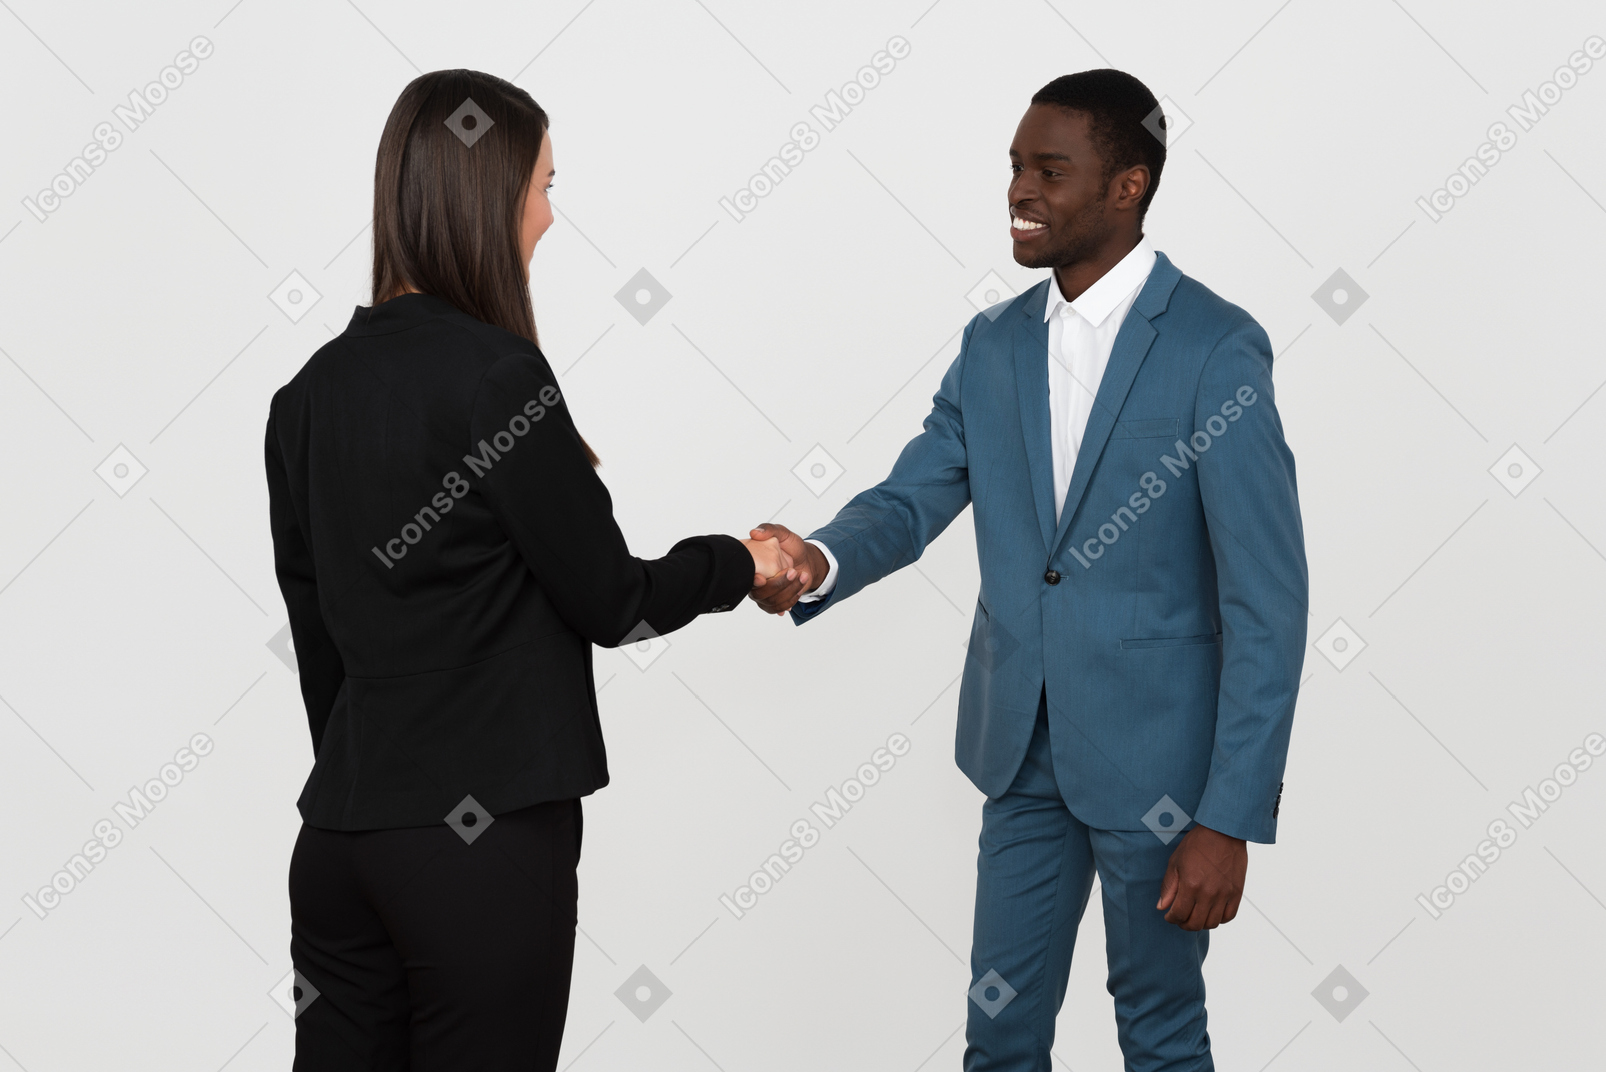 Coworkers shaking hands